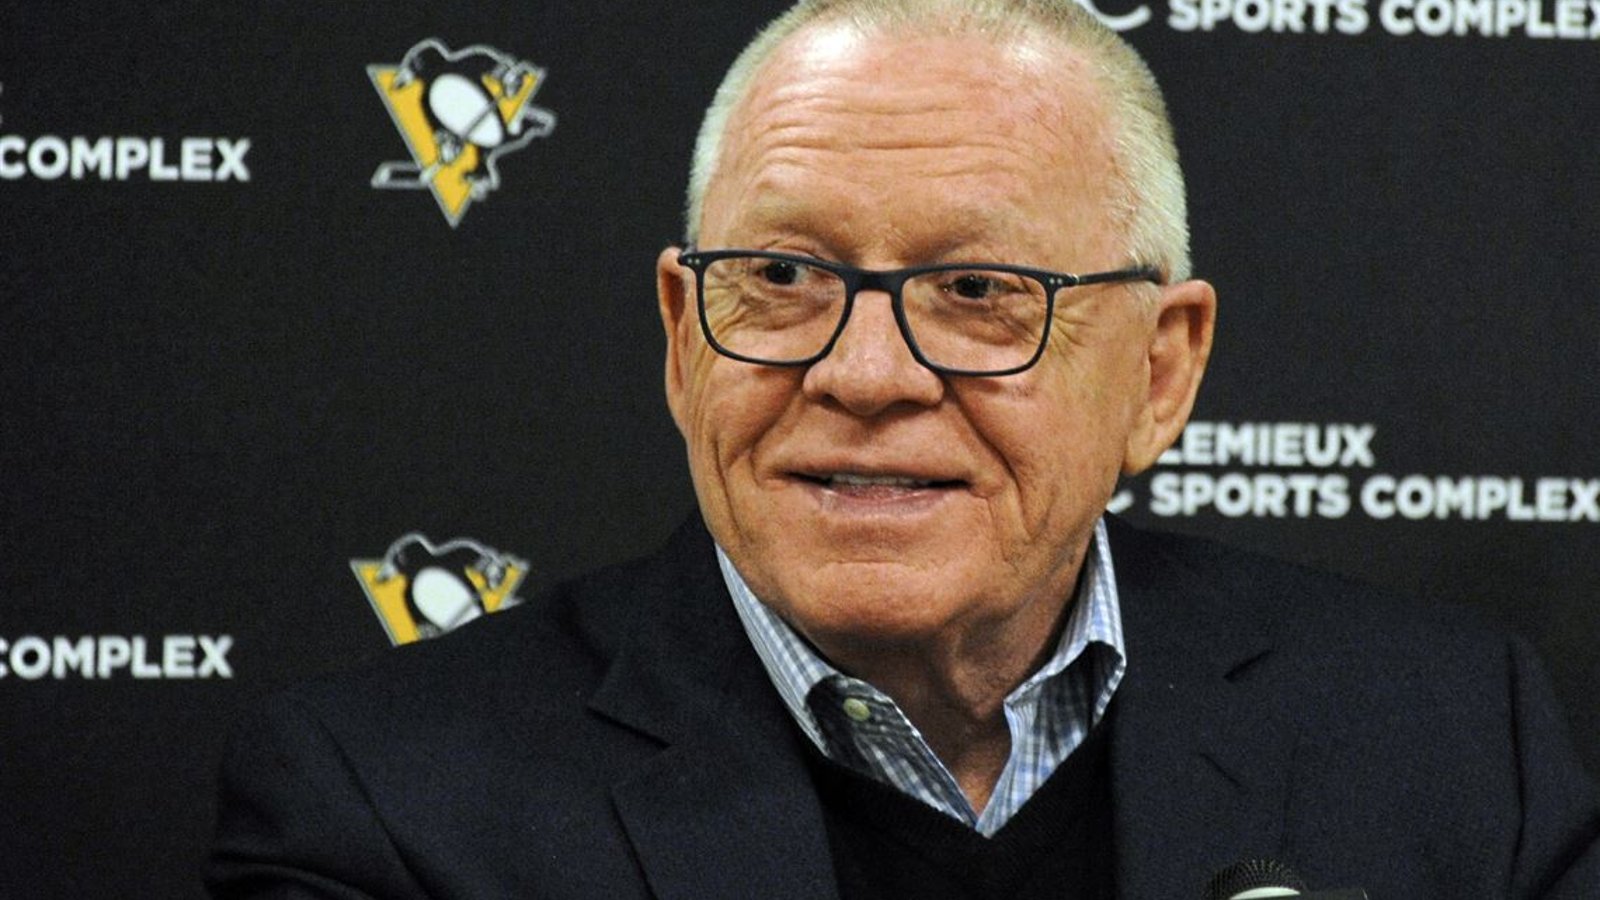 Penguins GM Jim Rutheford has resigned due to personal reasons 